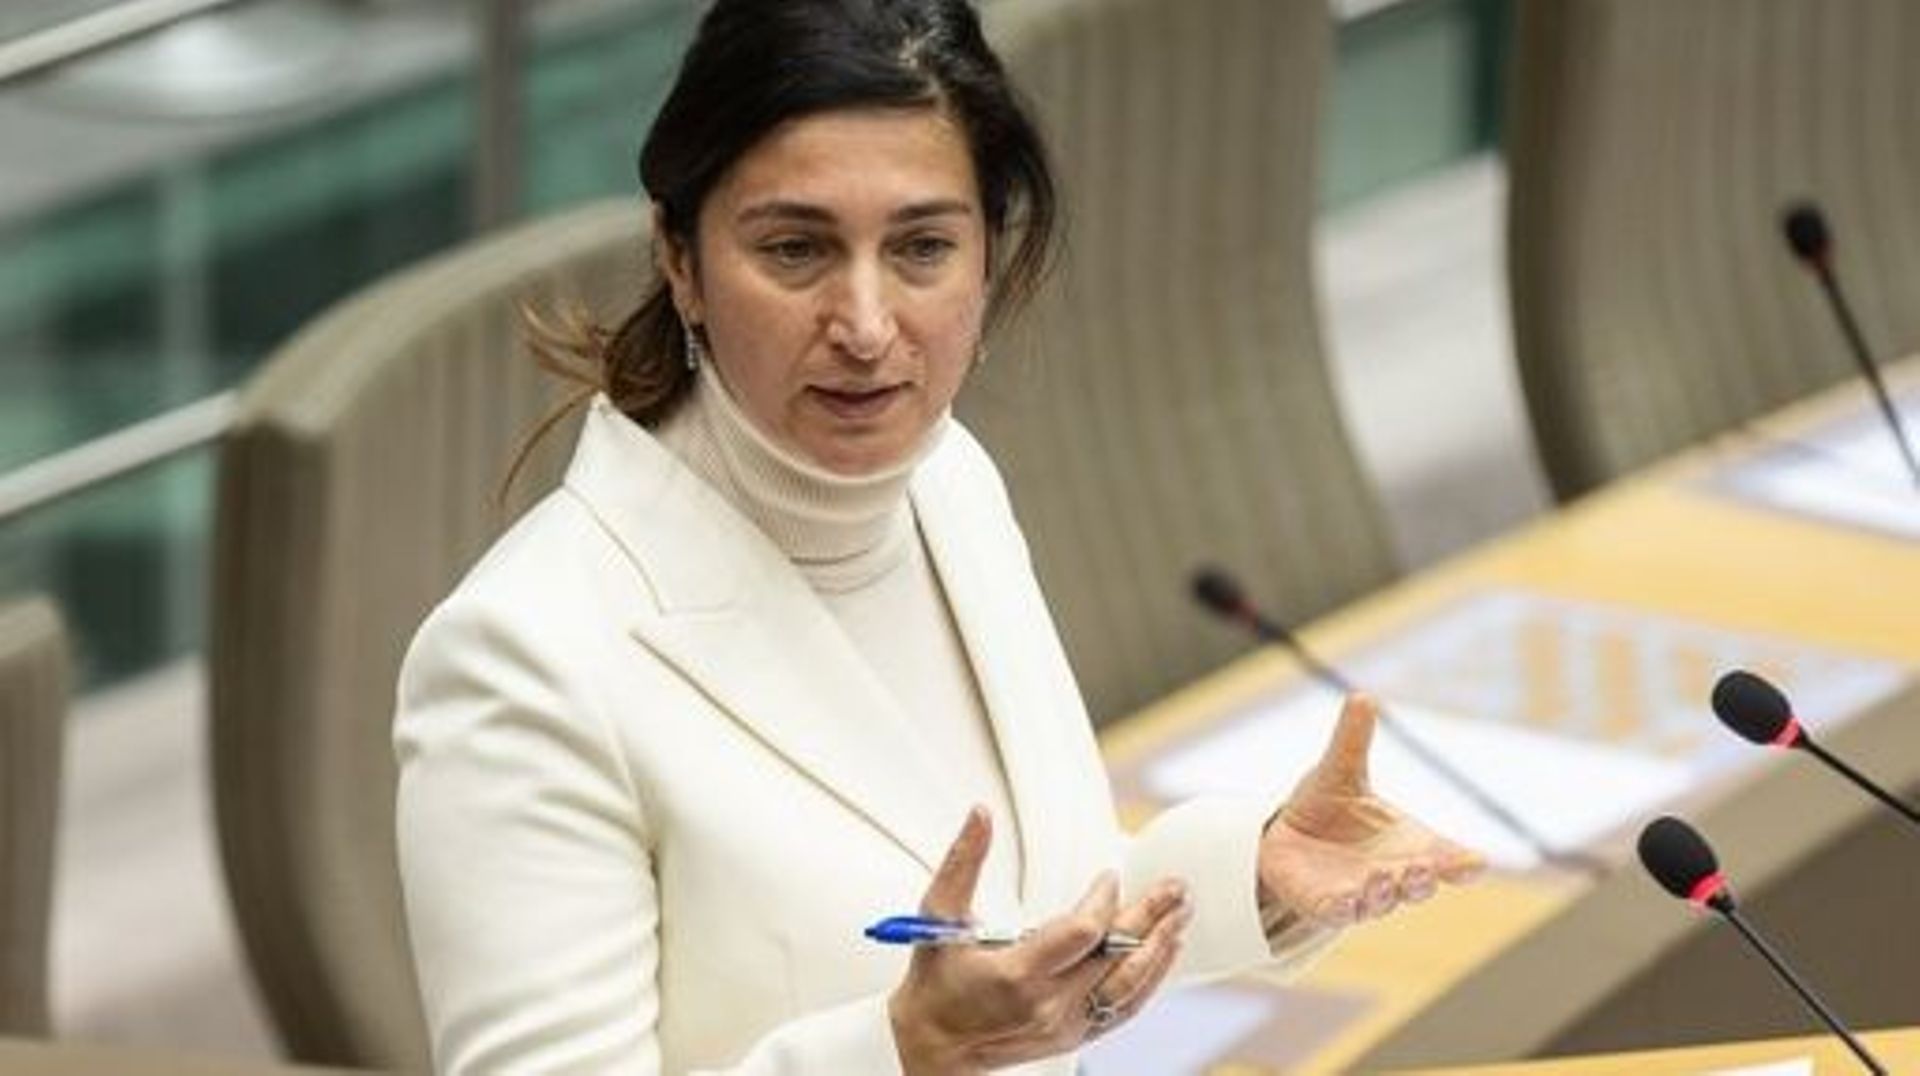 Flemish Minister of Environment, Energy, Tourism and Justice Zuhal Demir pictured during a plenary session of the Flemish Parliament in Brussels, Wednesday 25 January 2023. BELGA PHOTO JAMES ARTHUR GEKIERE